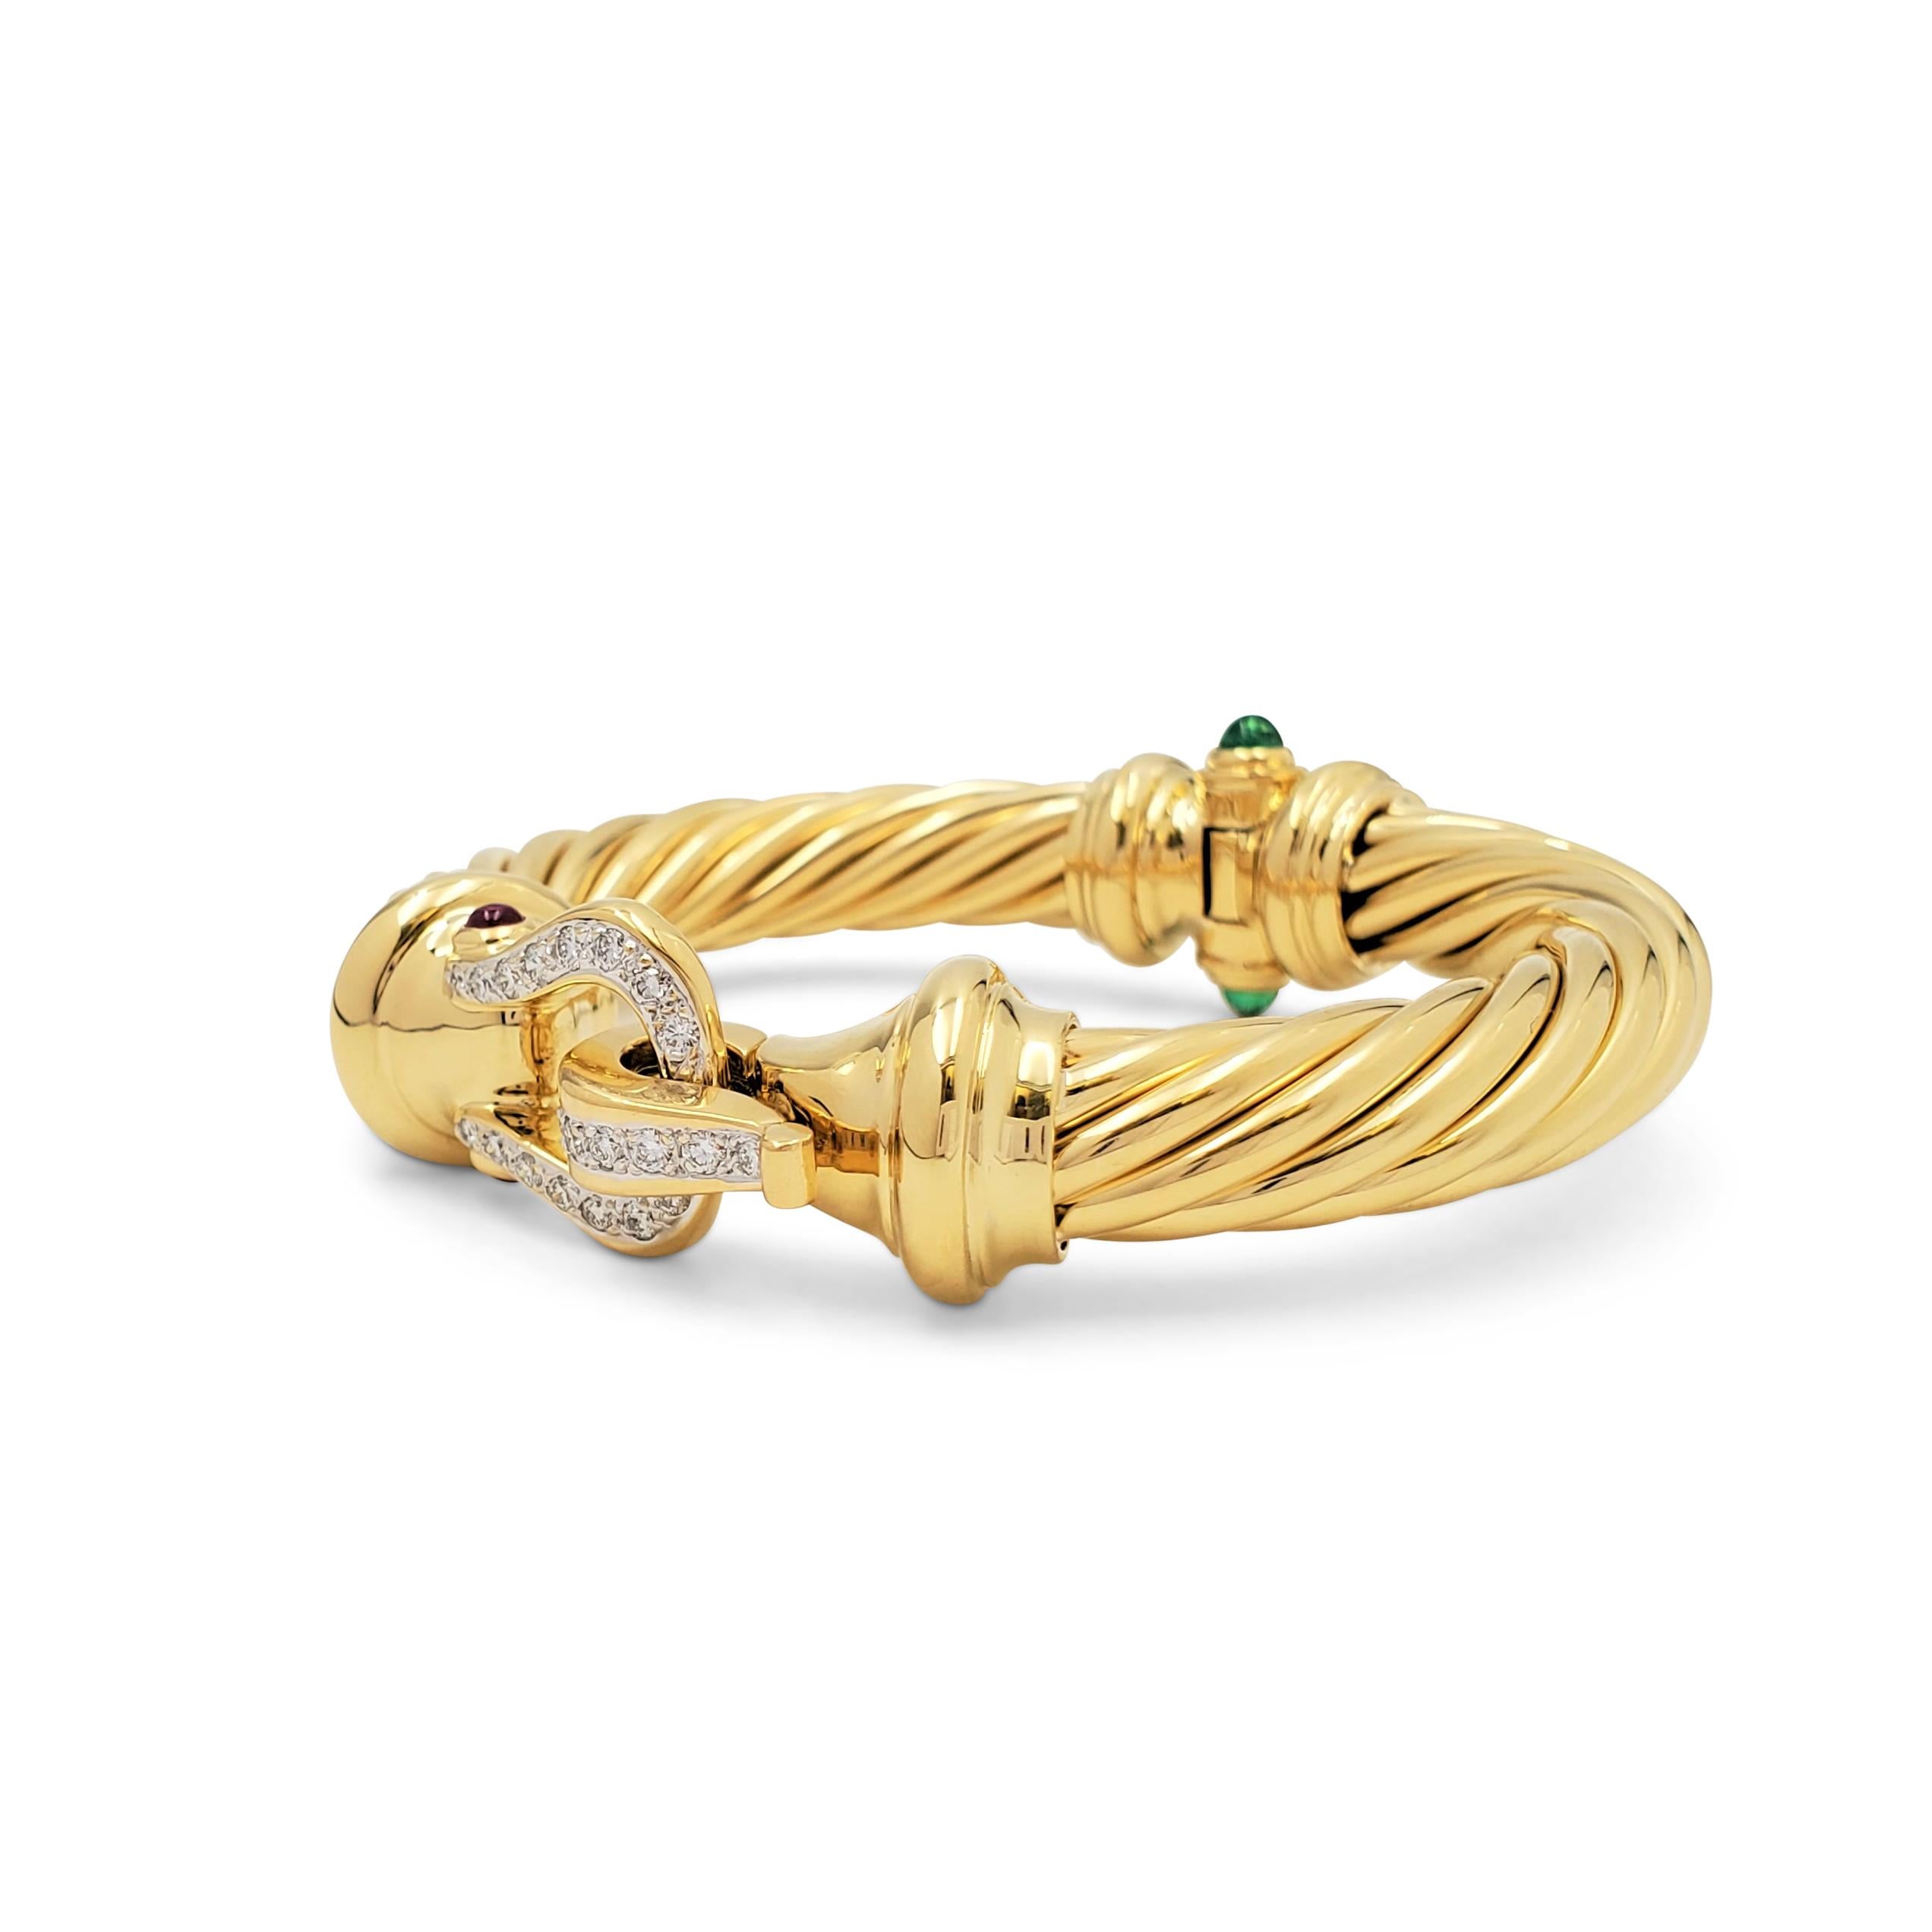 Authentic David Yurman Cable bracelet crafted in 18 karat yellow gold features a buckle motif that is set with an estimated 0.35 carats of round brilliant cut diamonds (E-F, VS). Cabochon cut emerald and ruby stones accent the piece. Signed D.Y.,